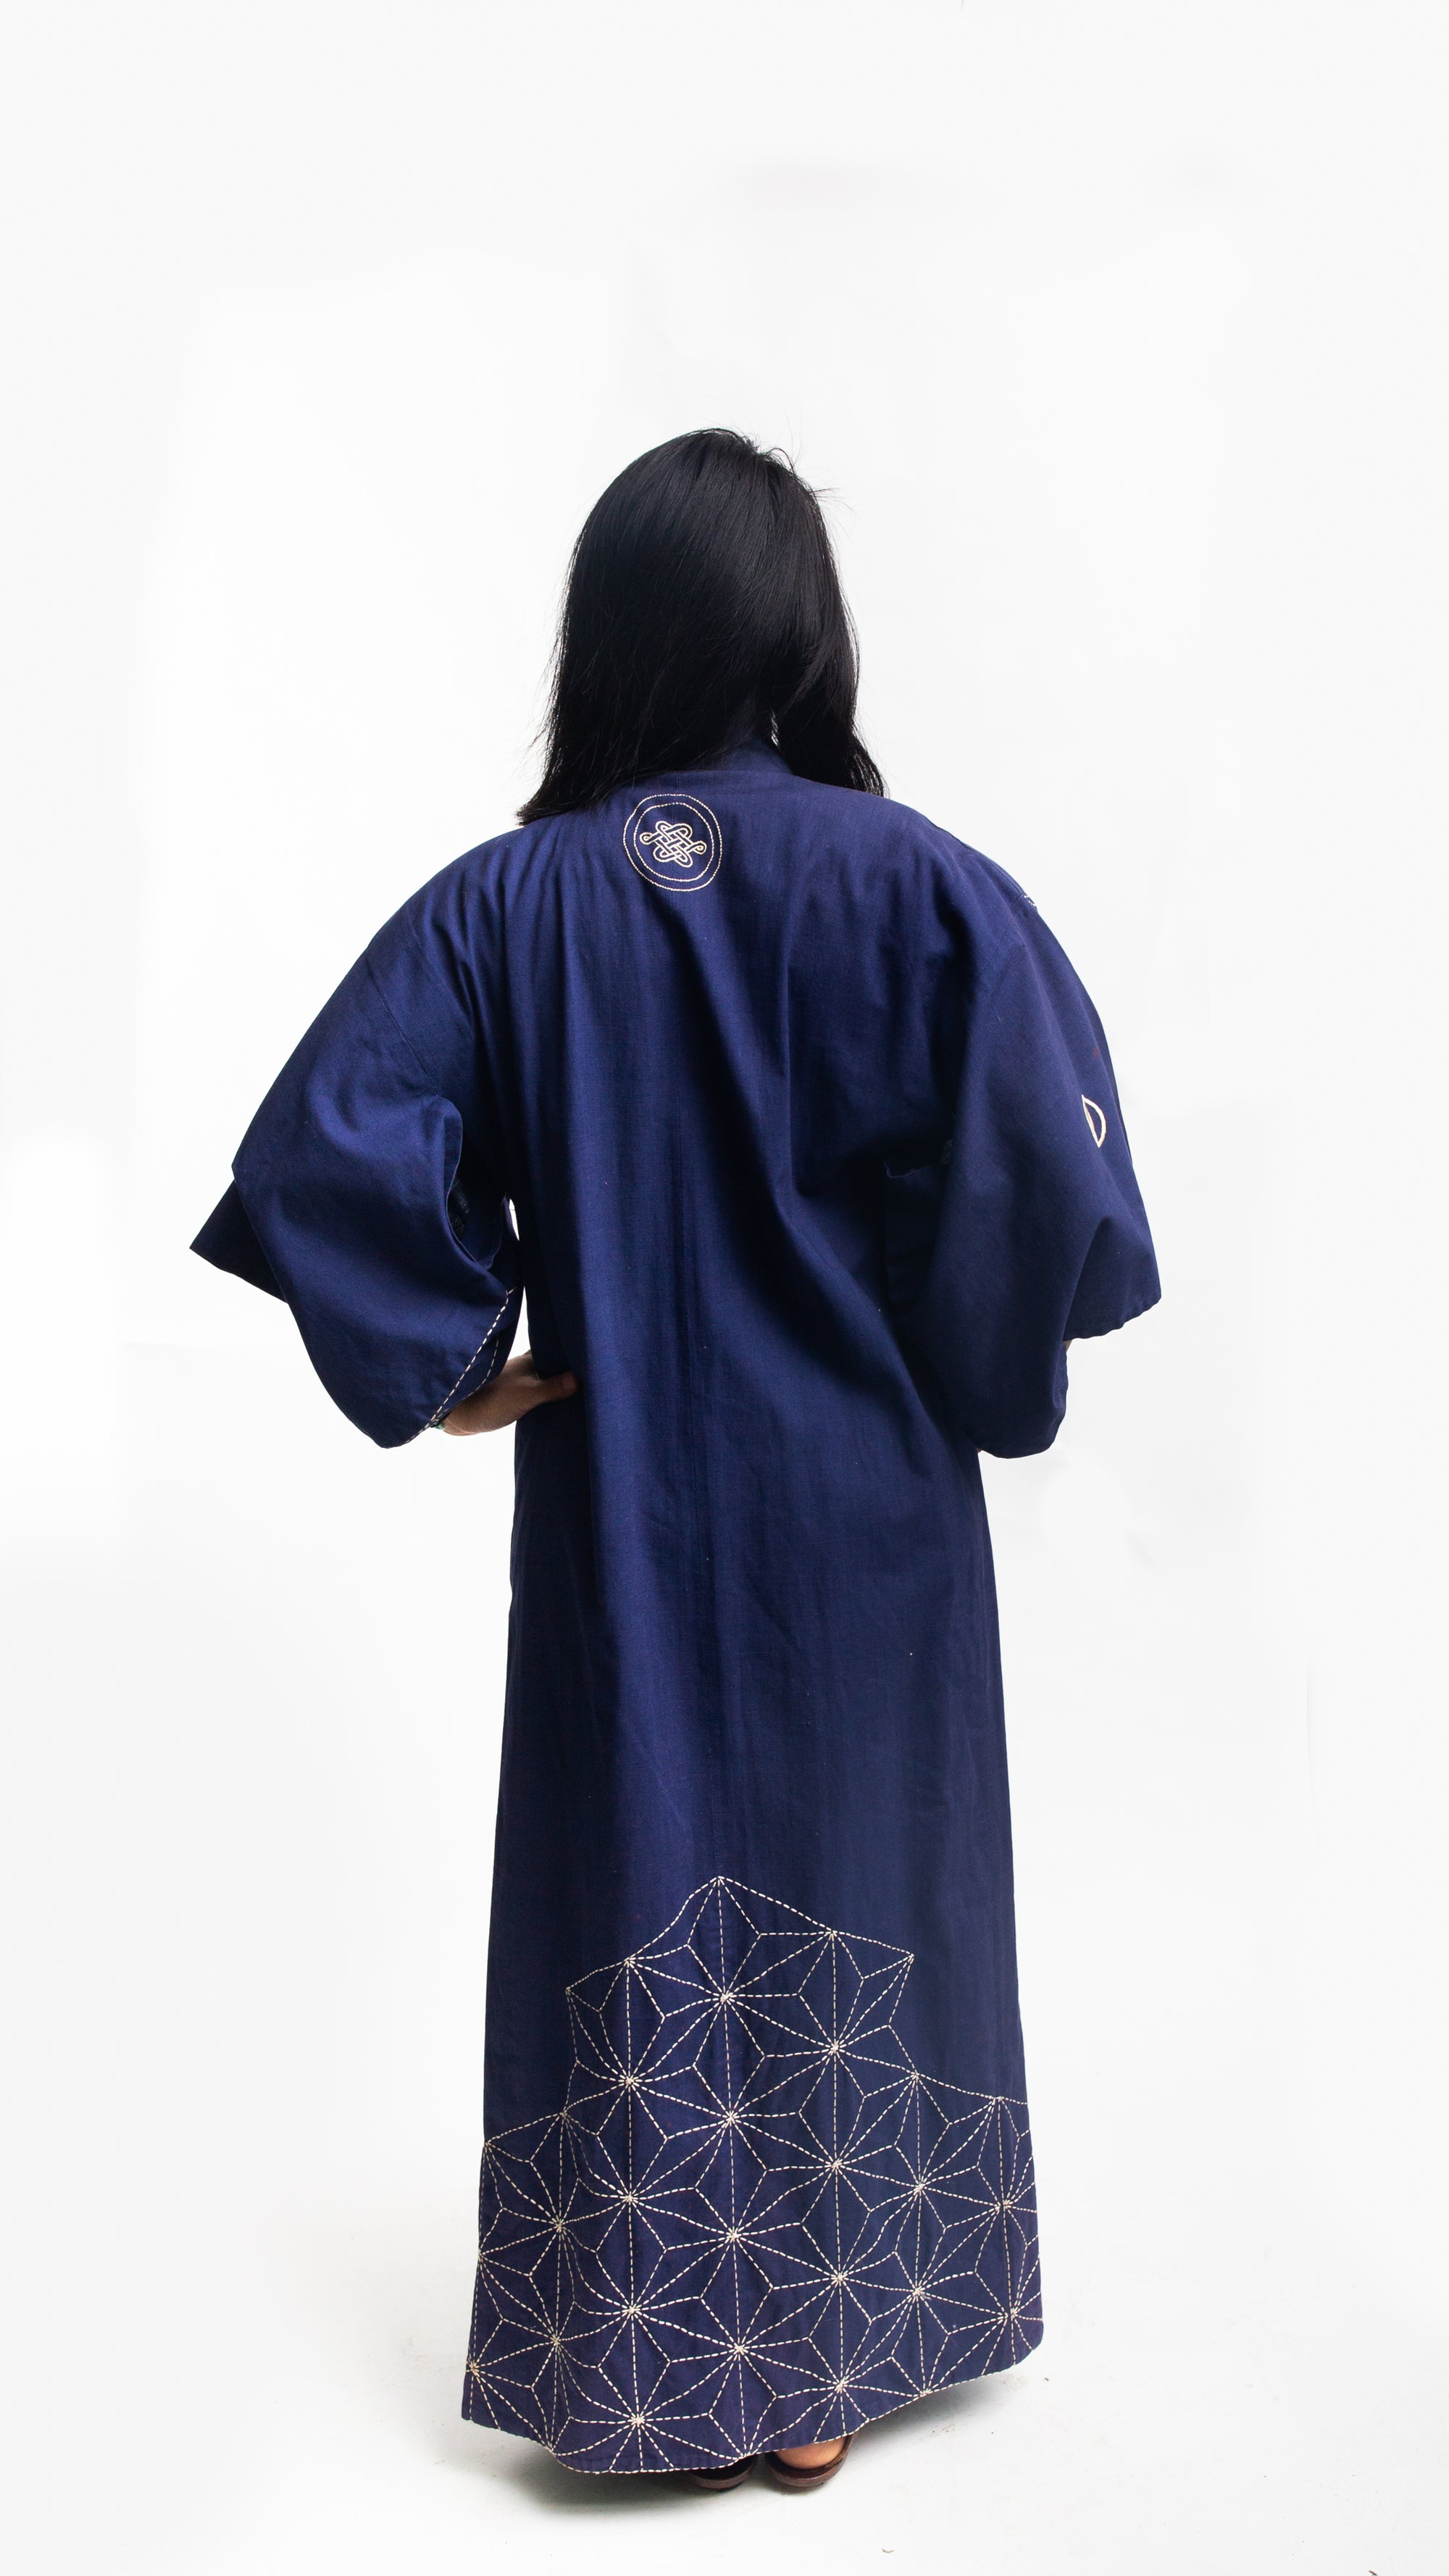 Asian American woman wearing a navy embroidered kimono standing in front of a white background. Woman's back is to the camera and the sashiko embroidery shows at the kimono bottom